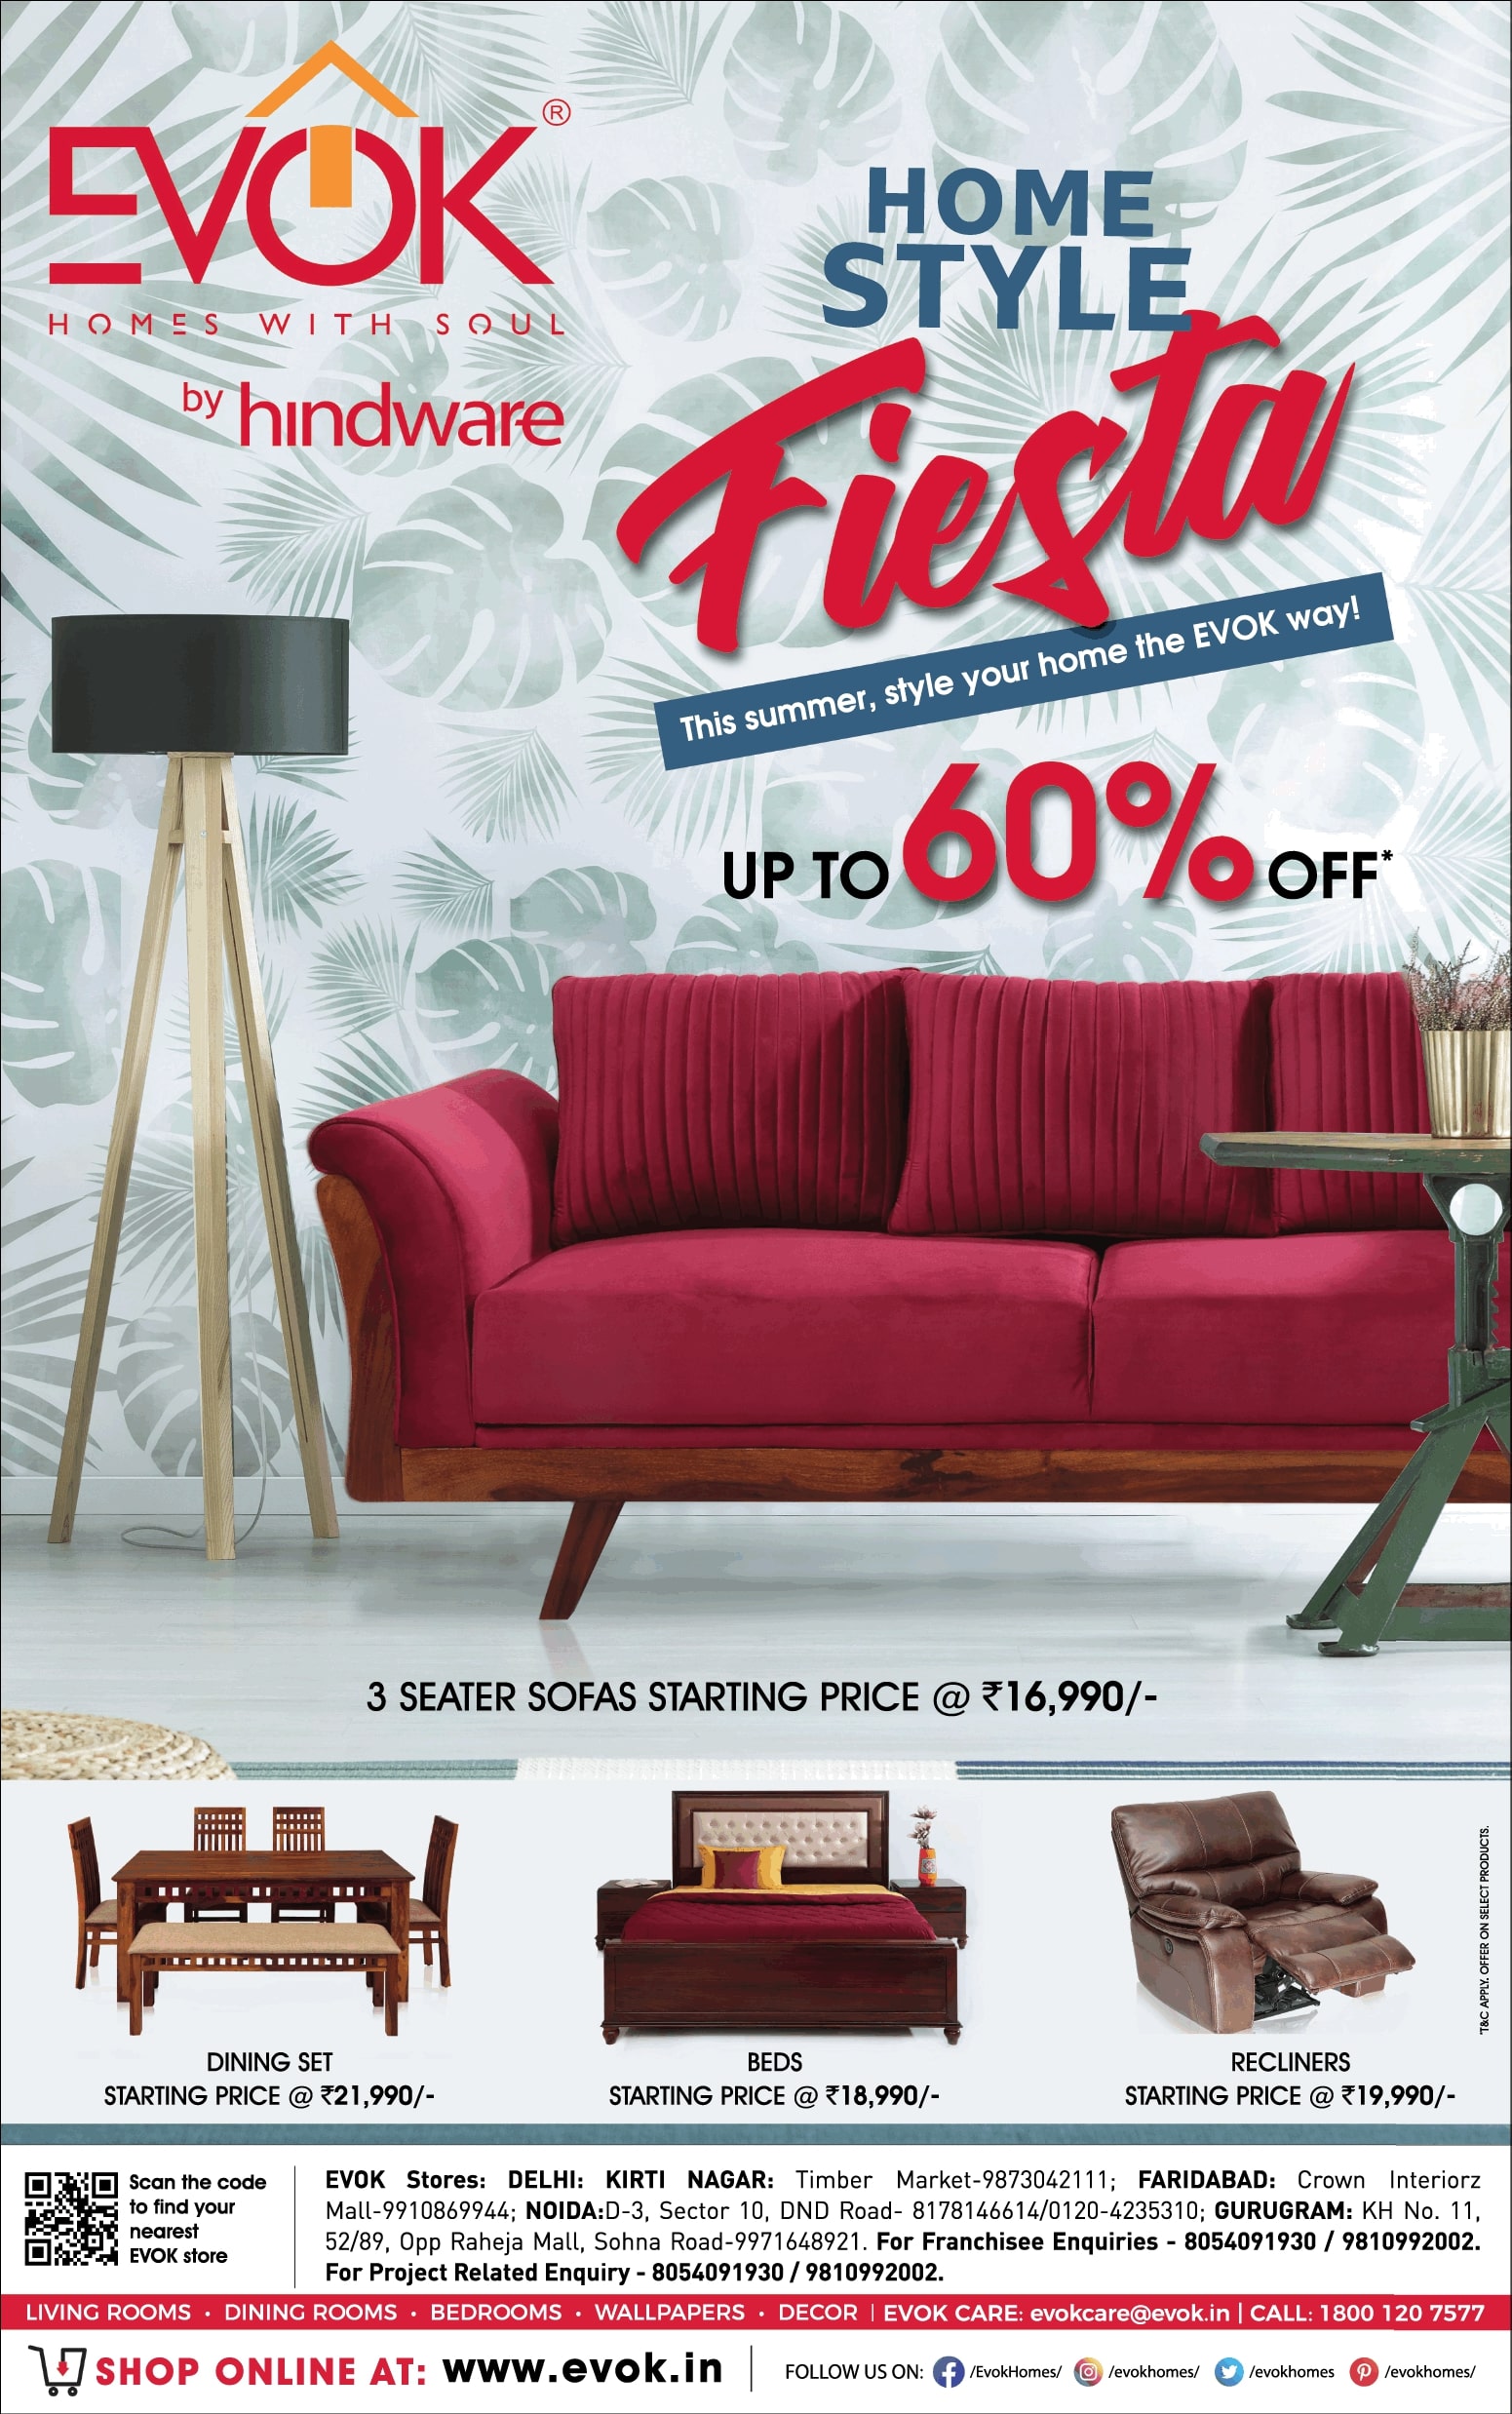 evok-by-hindware-home-style-fiesta-ad-delhi-times-10-04-2021